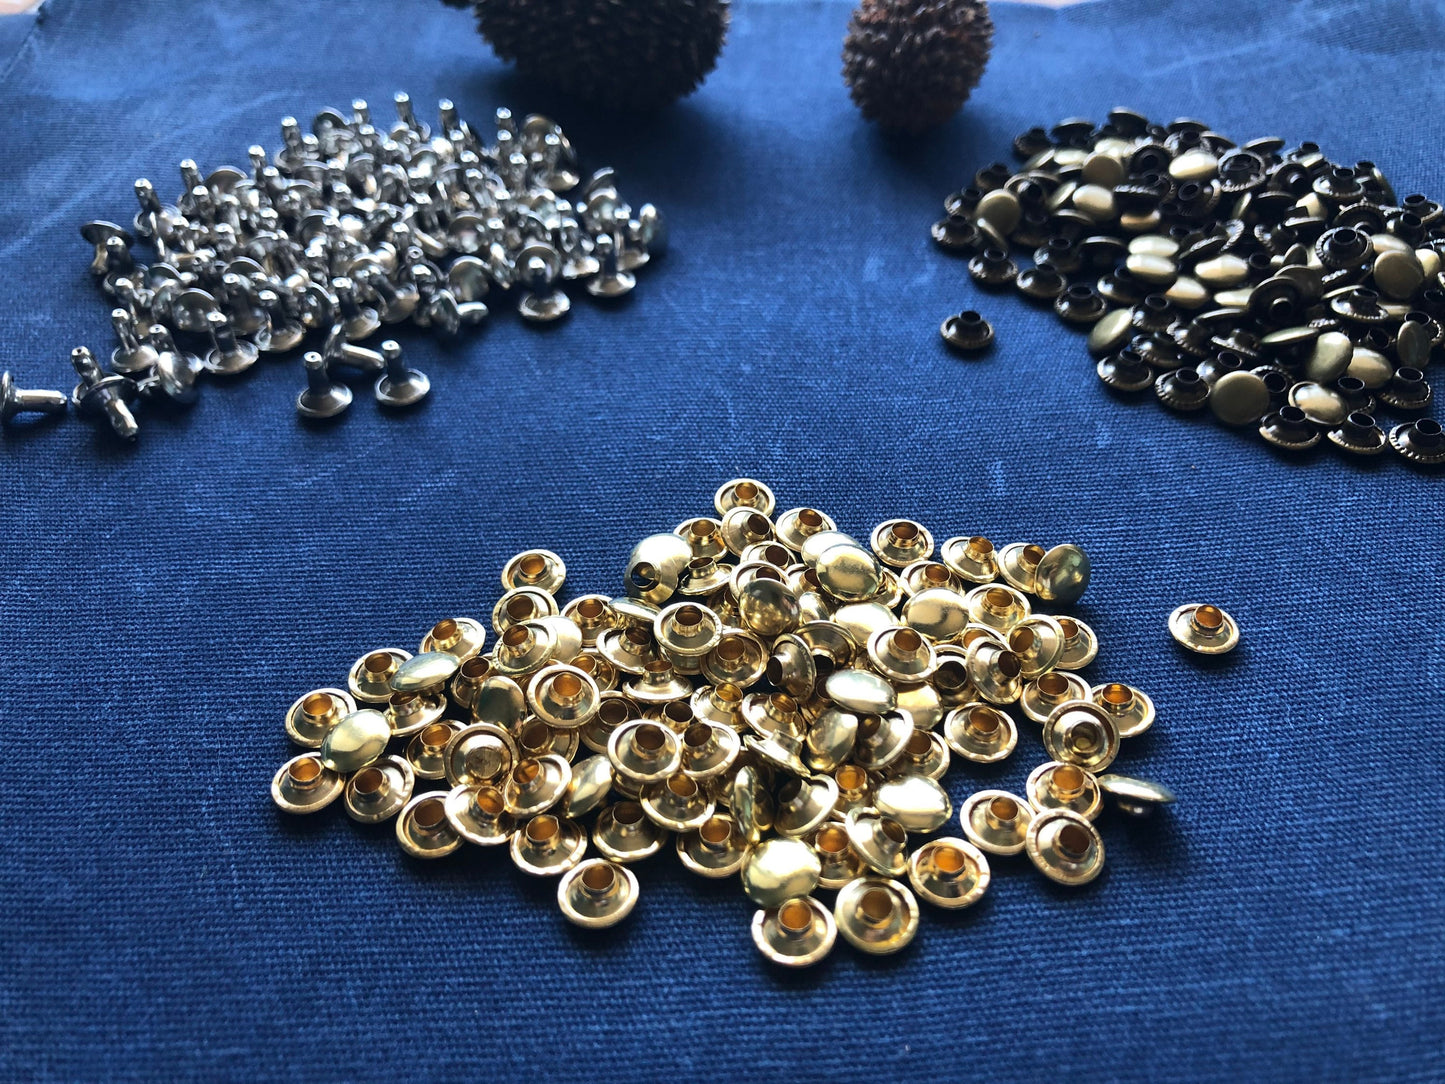 100 sets of double caps rivets, gun metal black, silver, gold rivets for bags, jackets, leather work